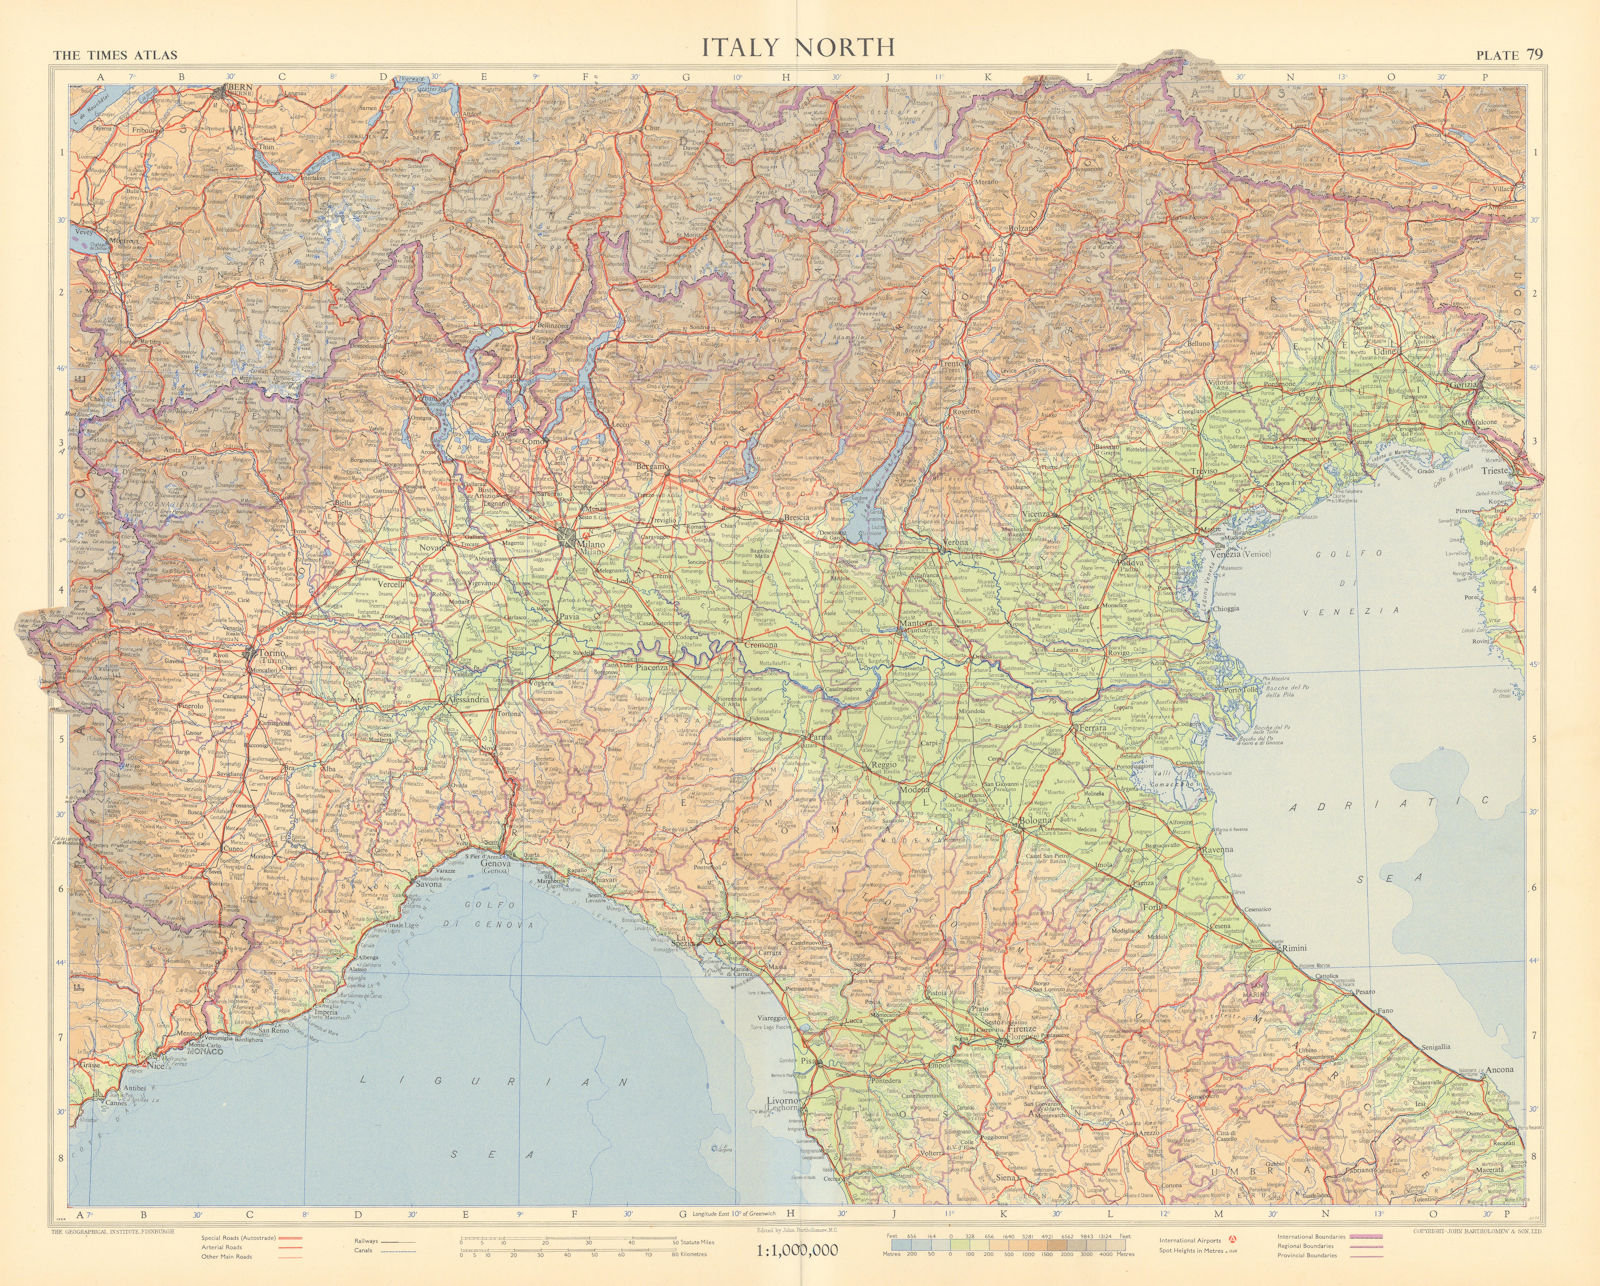 Italy north. Road network Autostrade. TIMES 1956 old vintage map plan chart